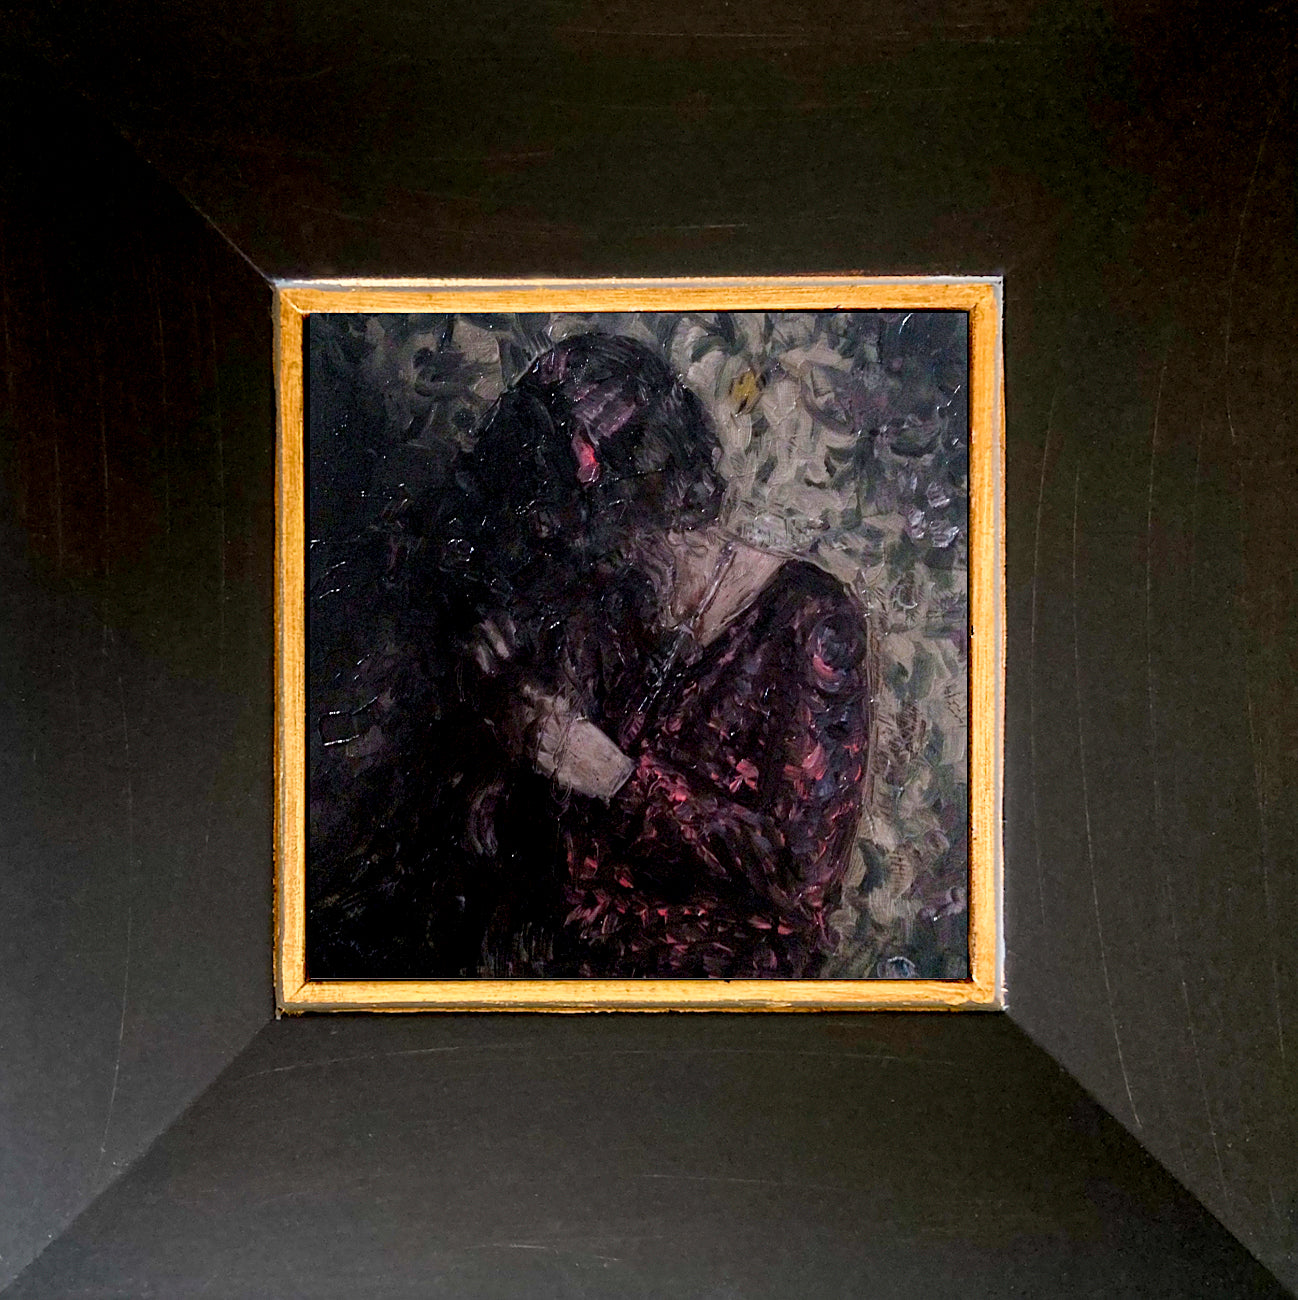 Abstract oil painting of woman in purple shades by E.E. Jacks in dark wood frame with gold trim